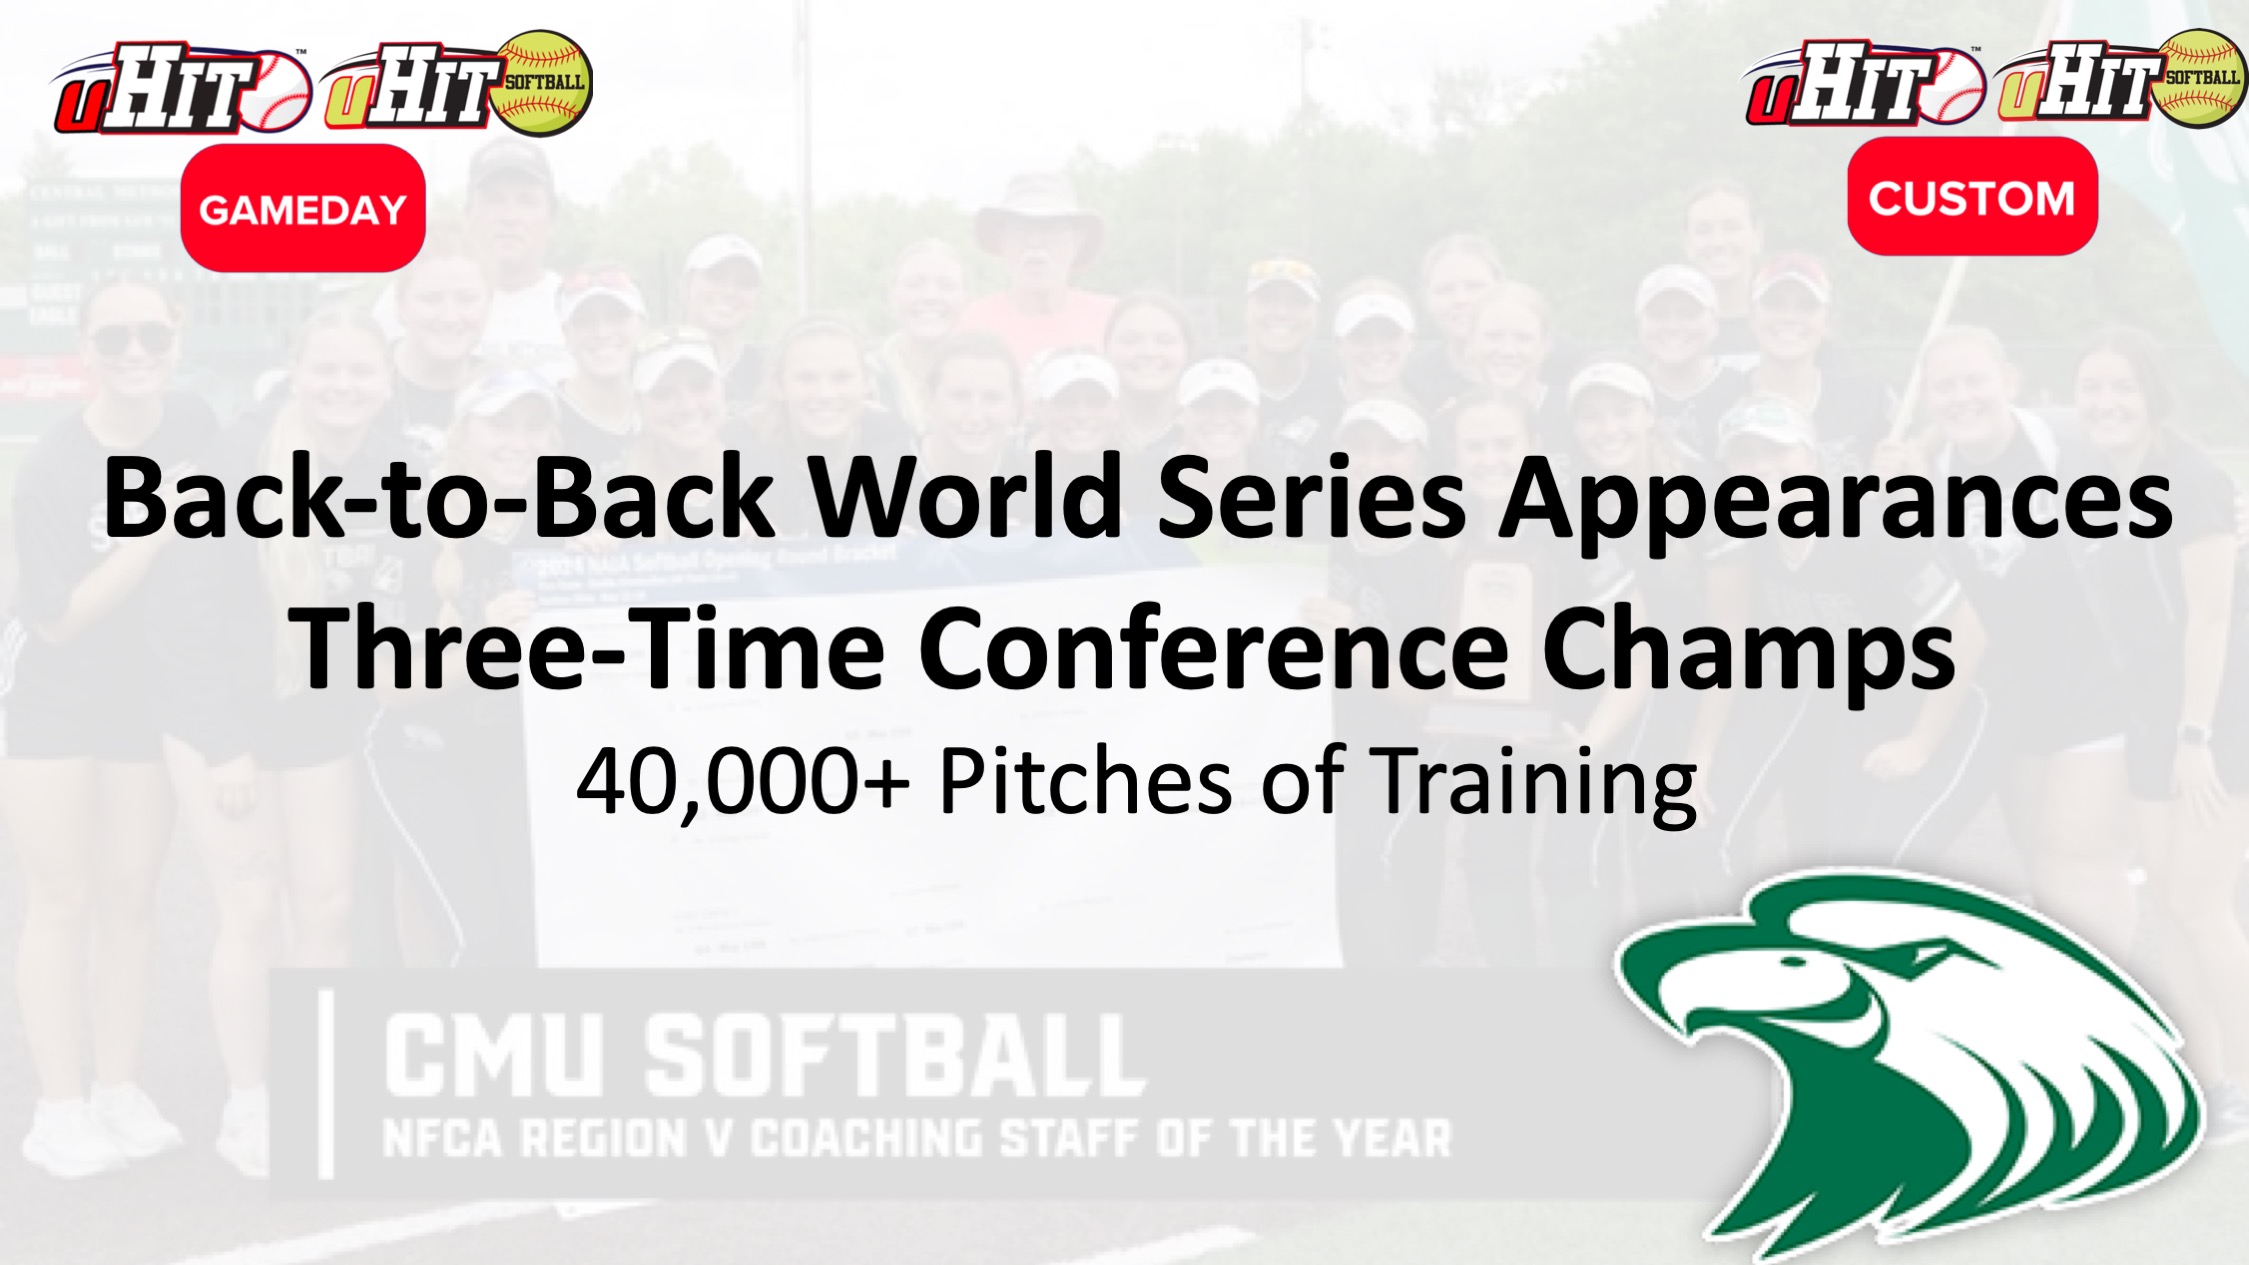 Central Methodist Softball World Series Appearances and Conference Champs with uHIT Custom and Gameday